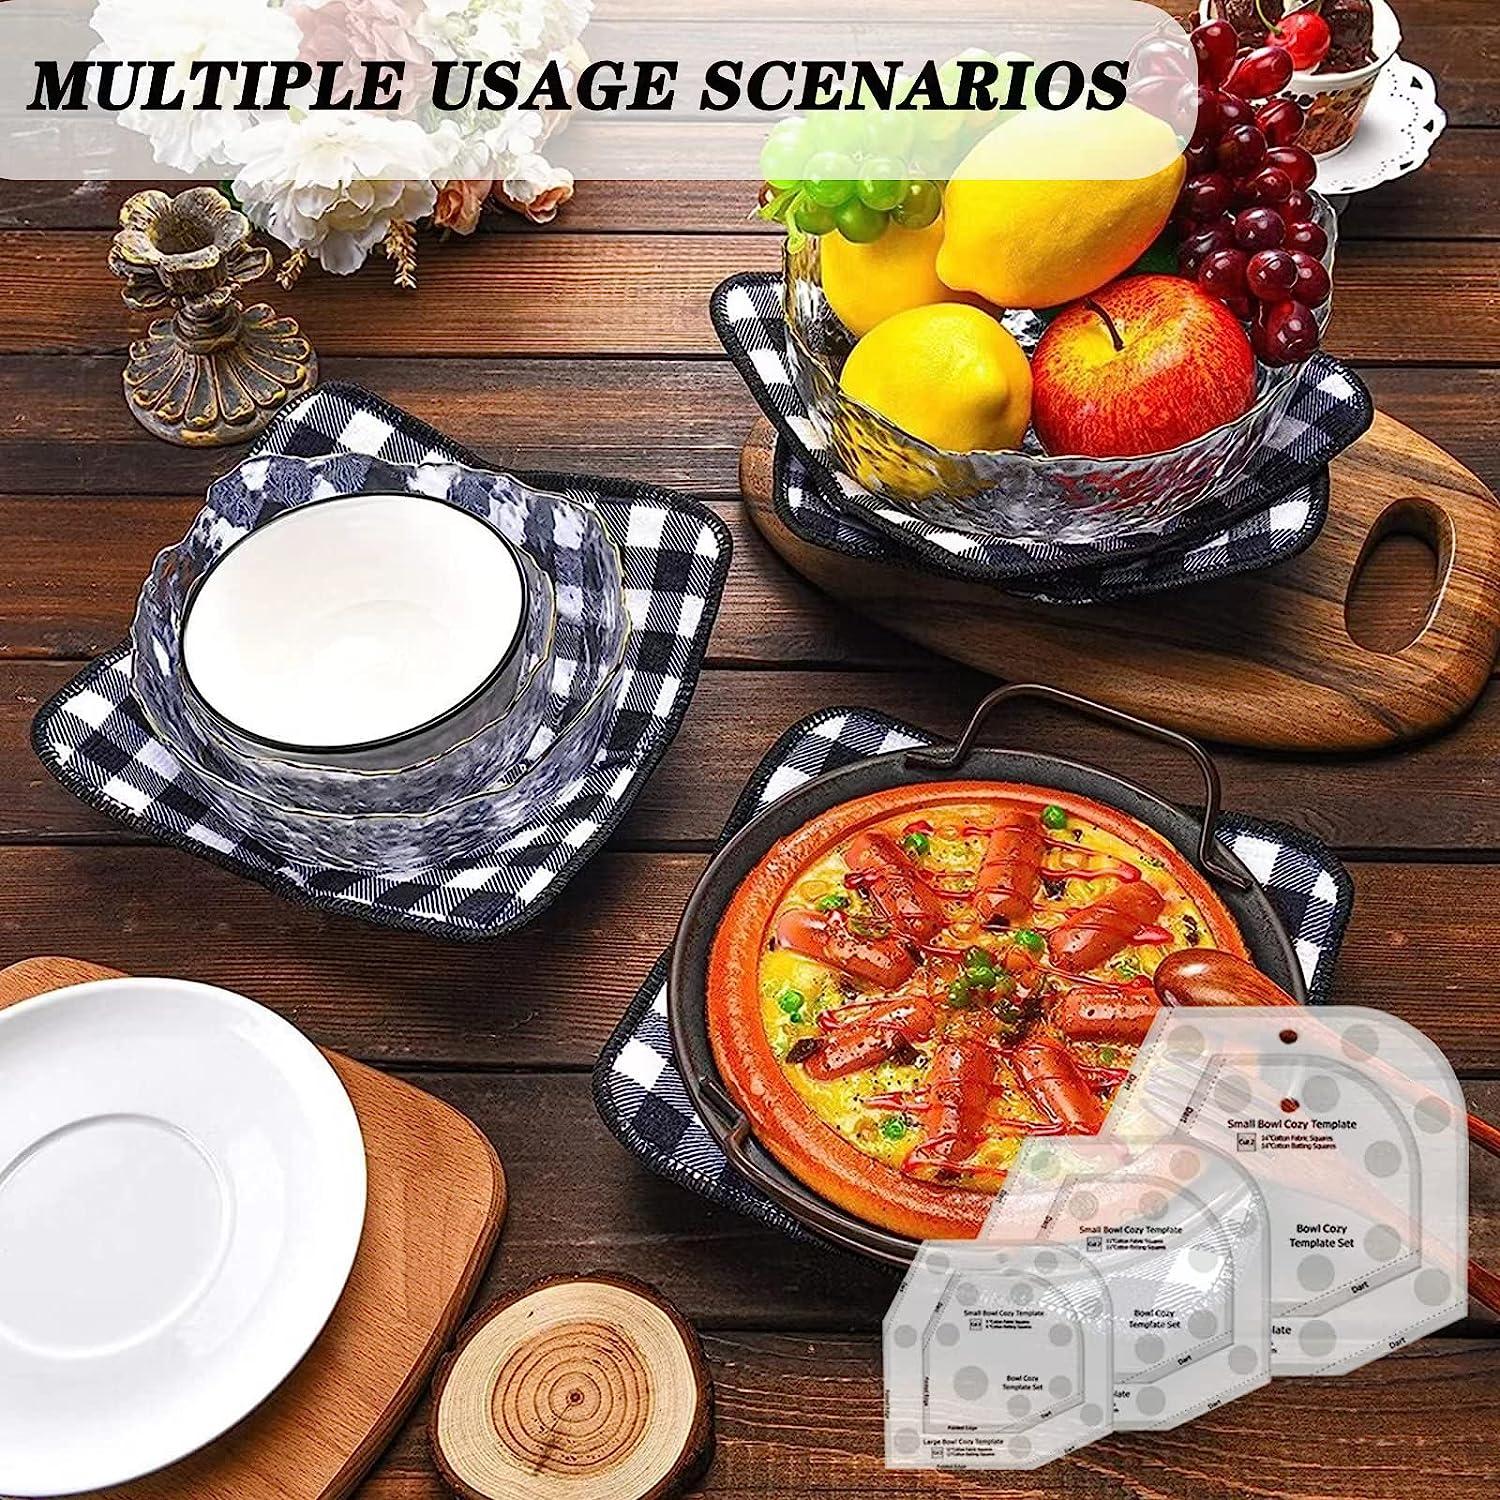 Bowl Cozy Template Cutting Ruler Set, Bowl Cozy Pattern Template